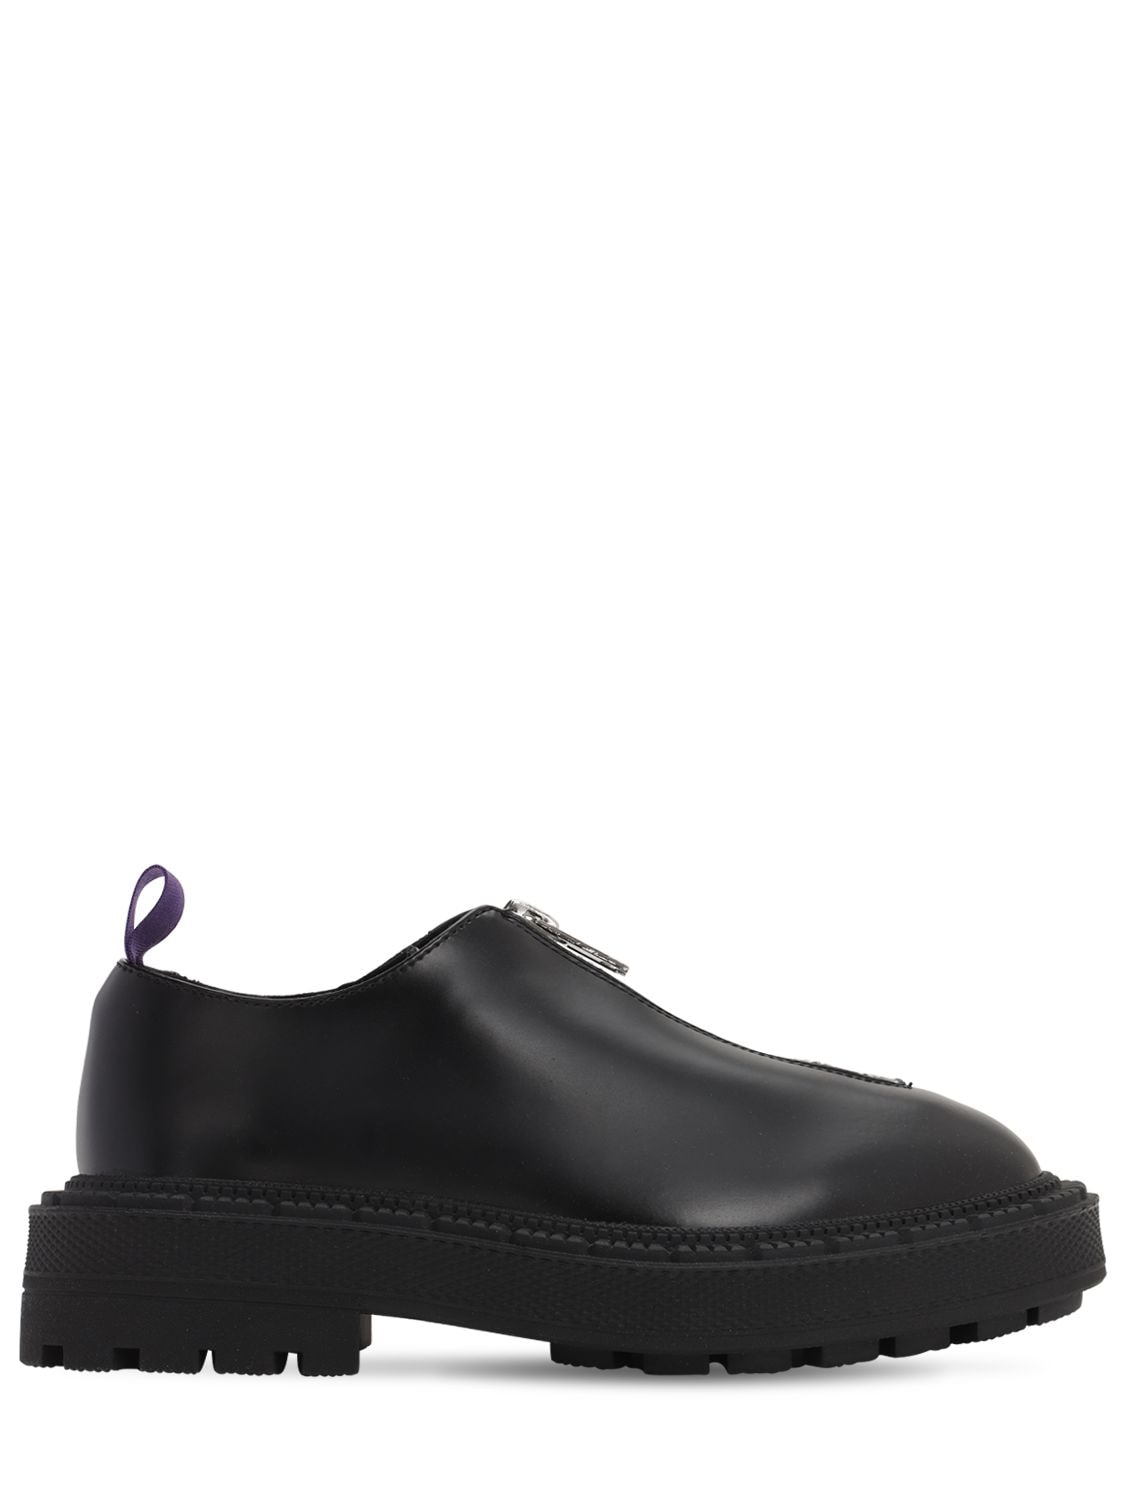 Eytys Alexia Platform Zip-up Leather Shoes In Black